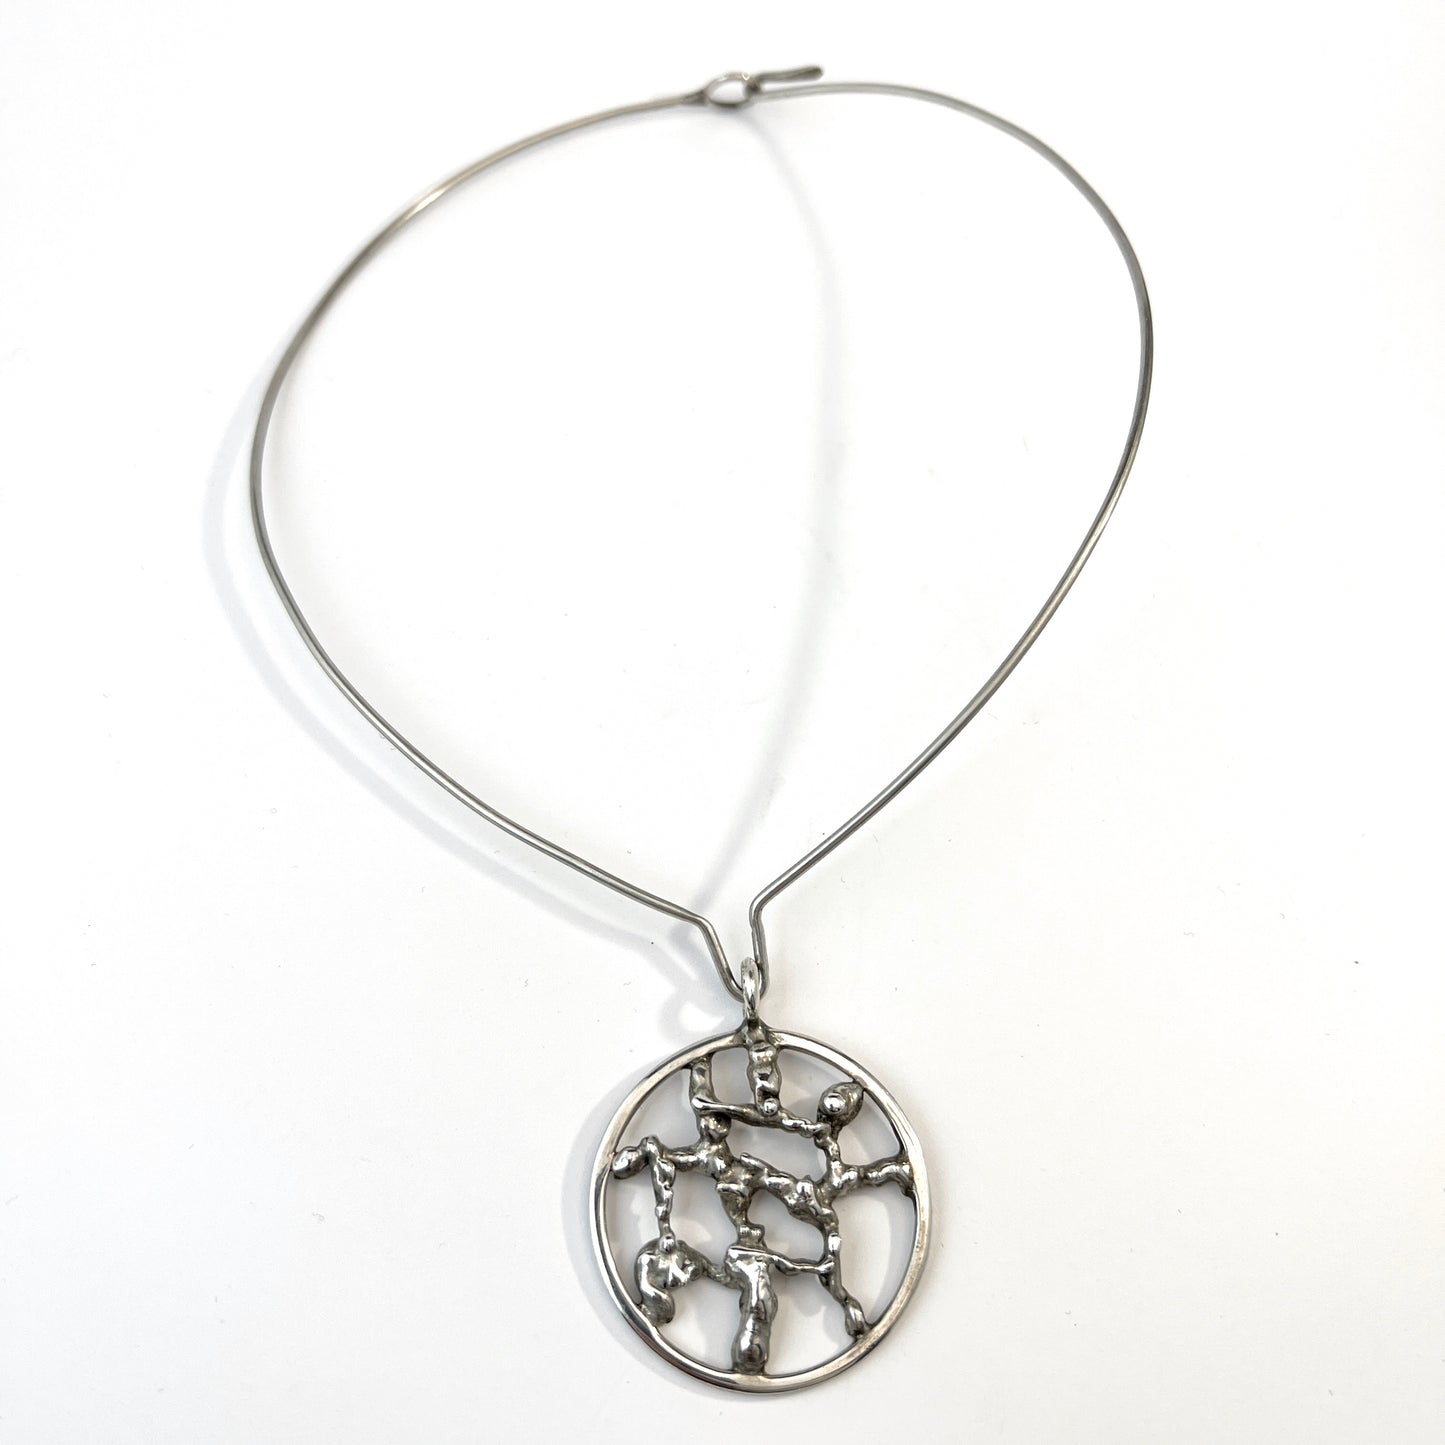 Olle Hellmouth, Sweden 1980. Vintage Solid Silver Pendant Necklace.